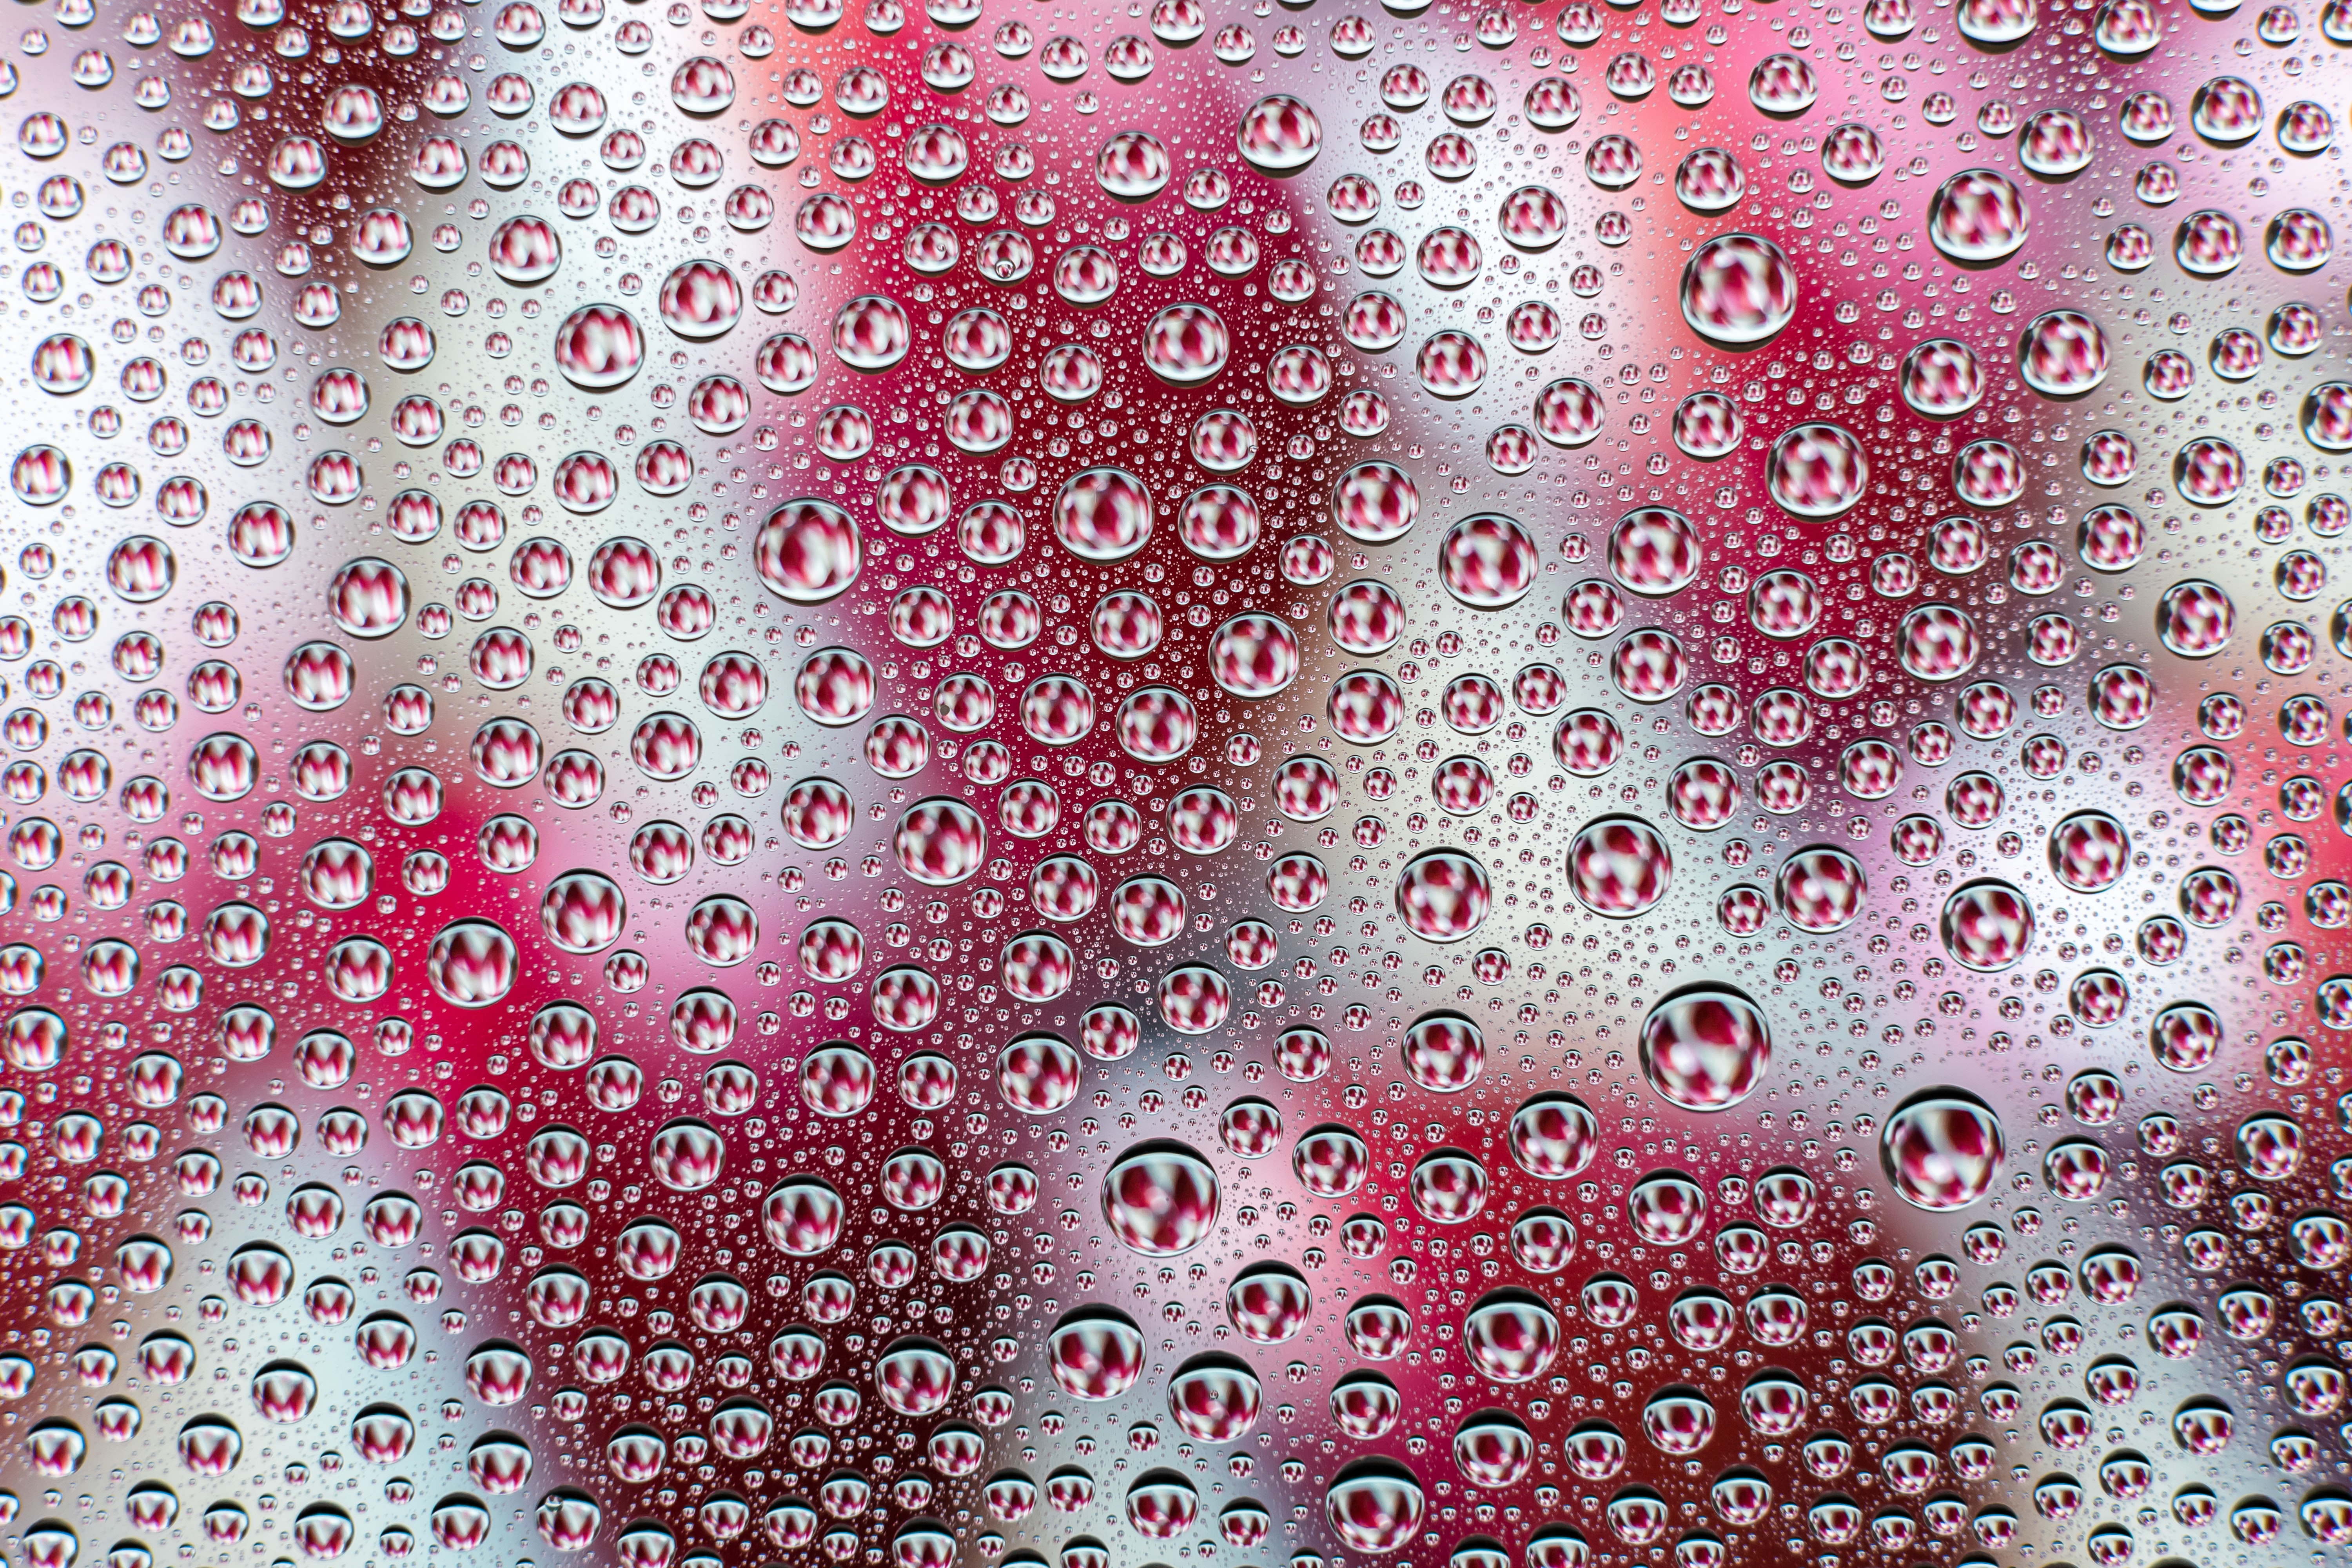 1920 x 1080 picture smooth, abstract, water, drops, glare, blur